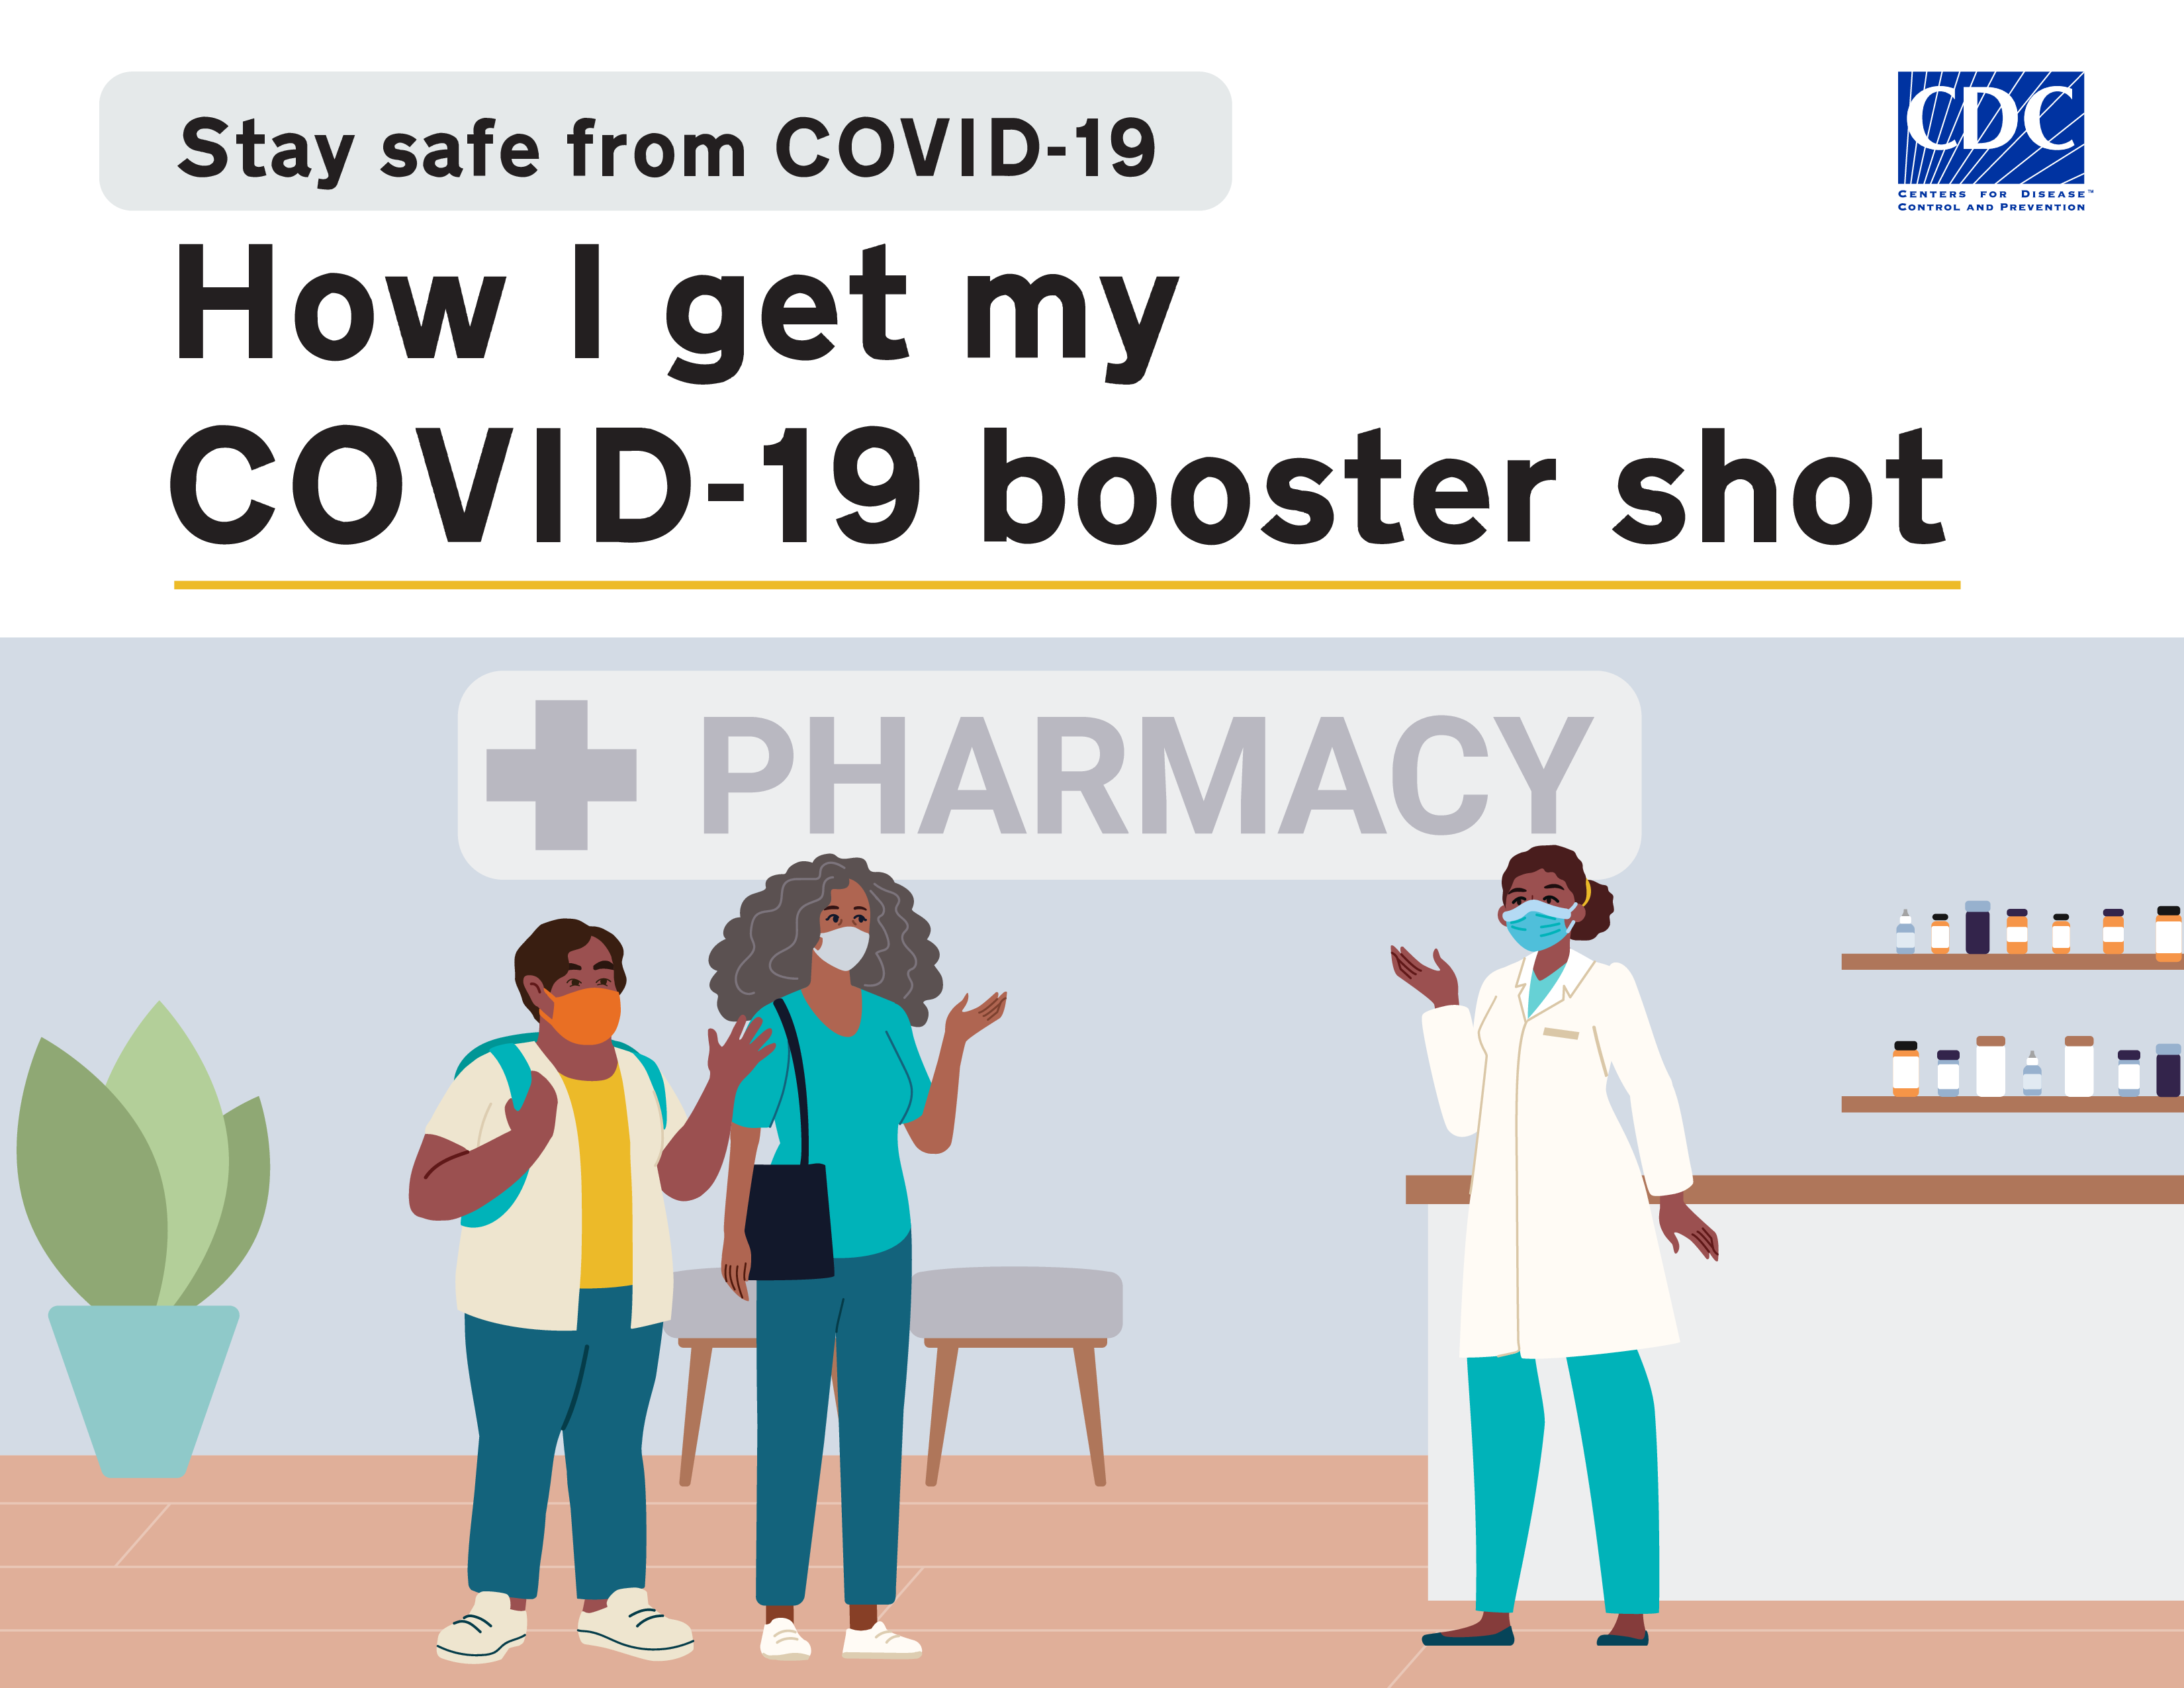 Two people talk to a pharmacist about their COVID-19 boosters.